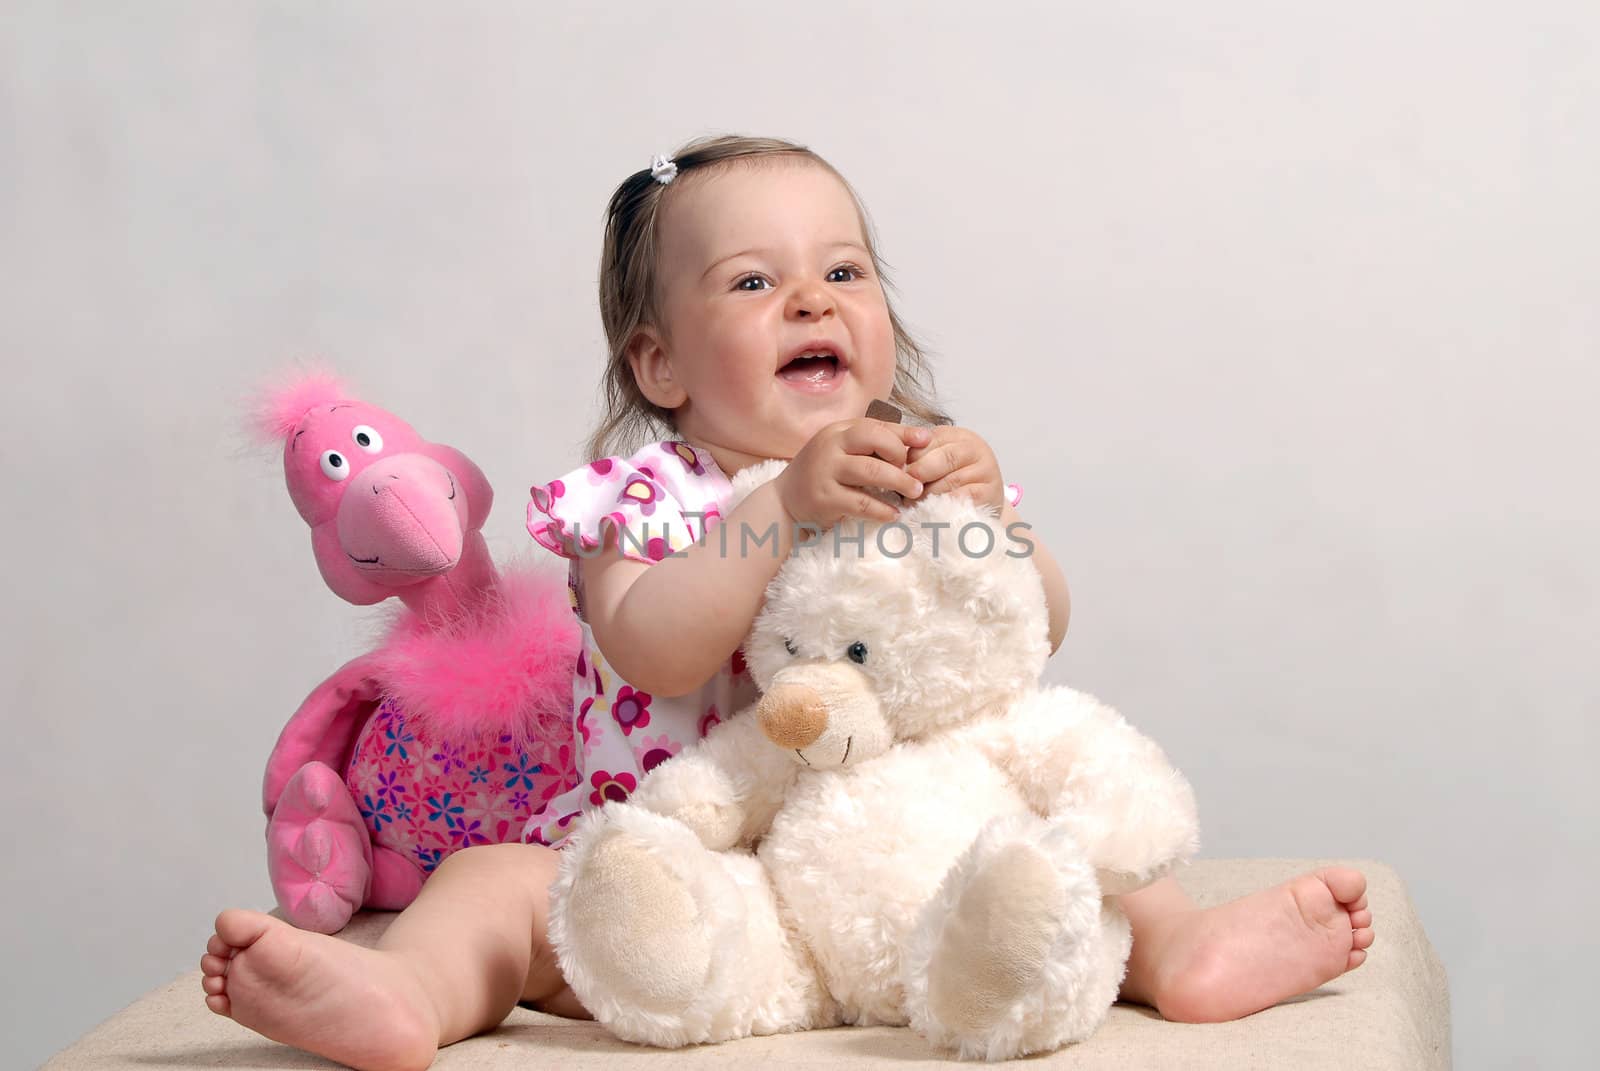 Laughing cute baby with teddy bear and rose flamingo isolated on white background
